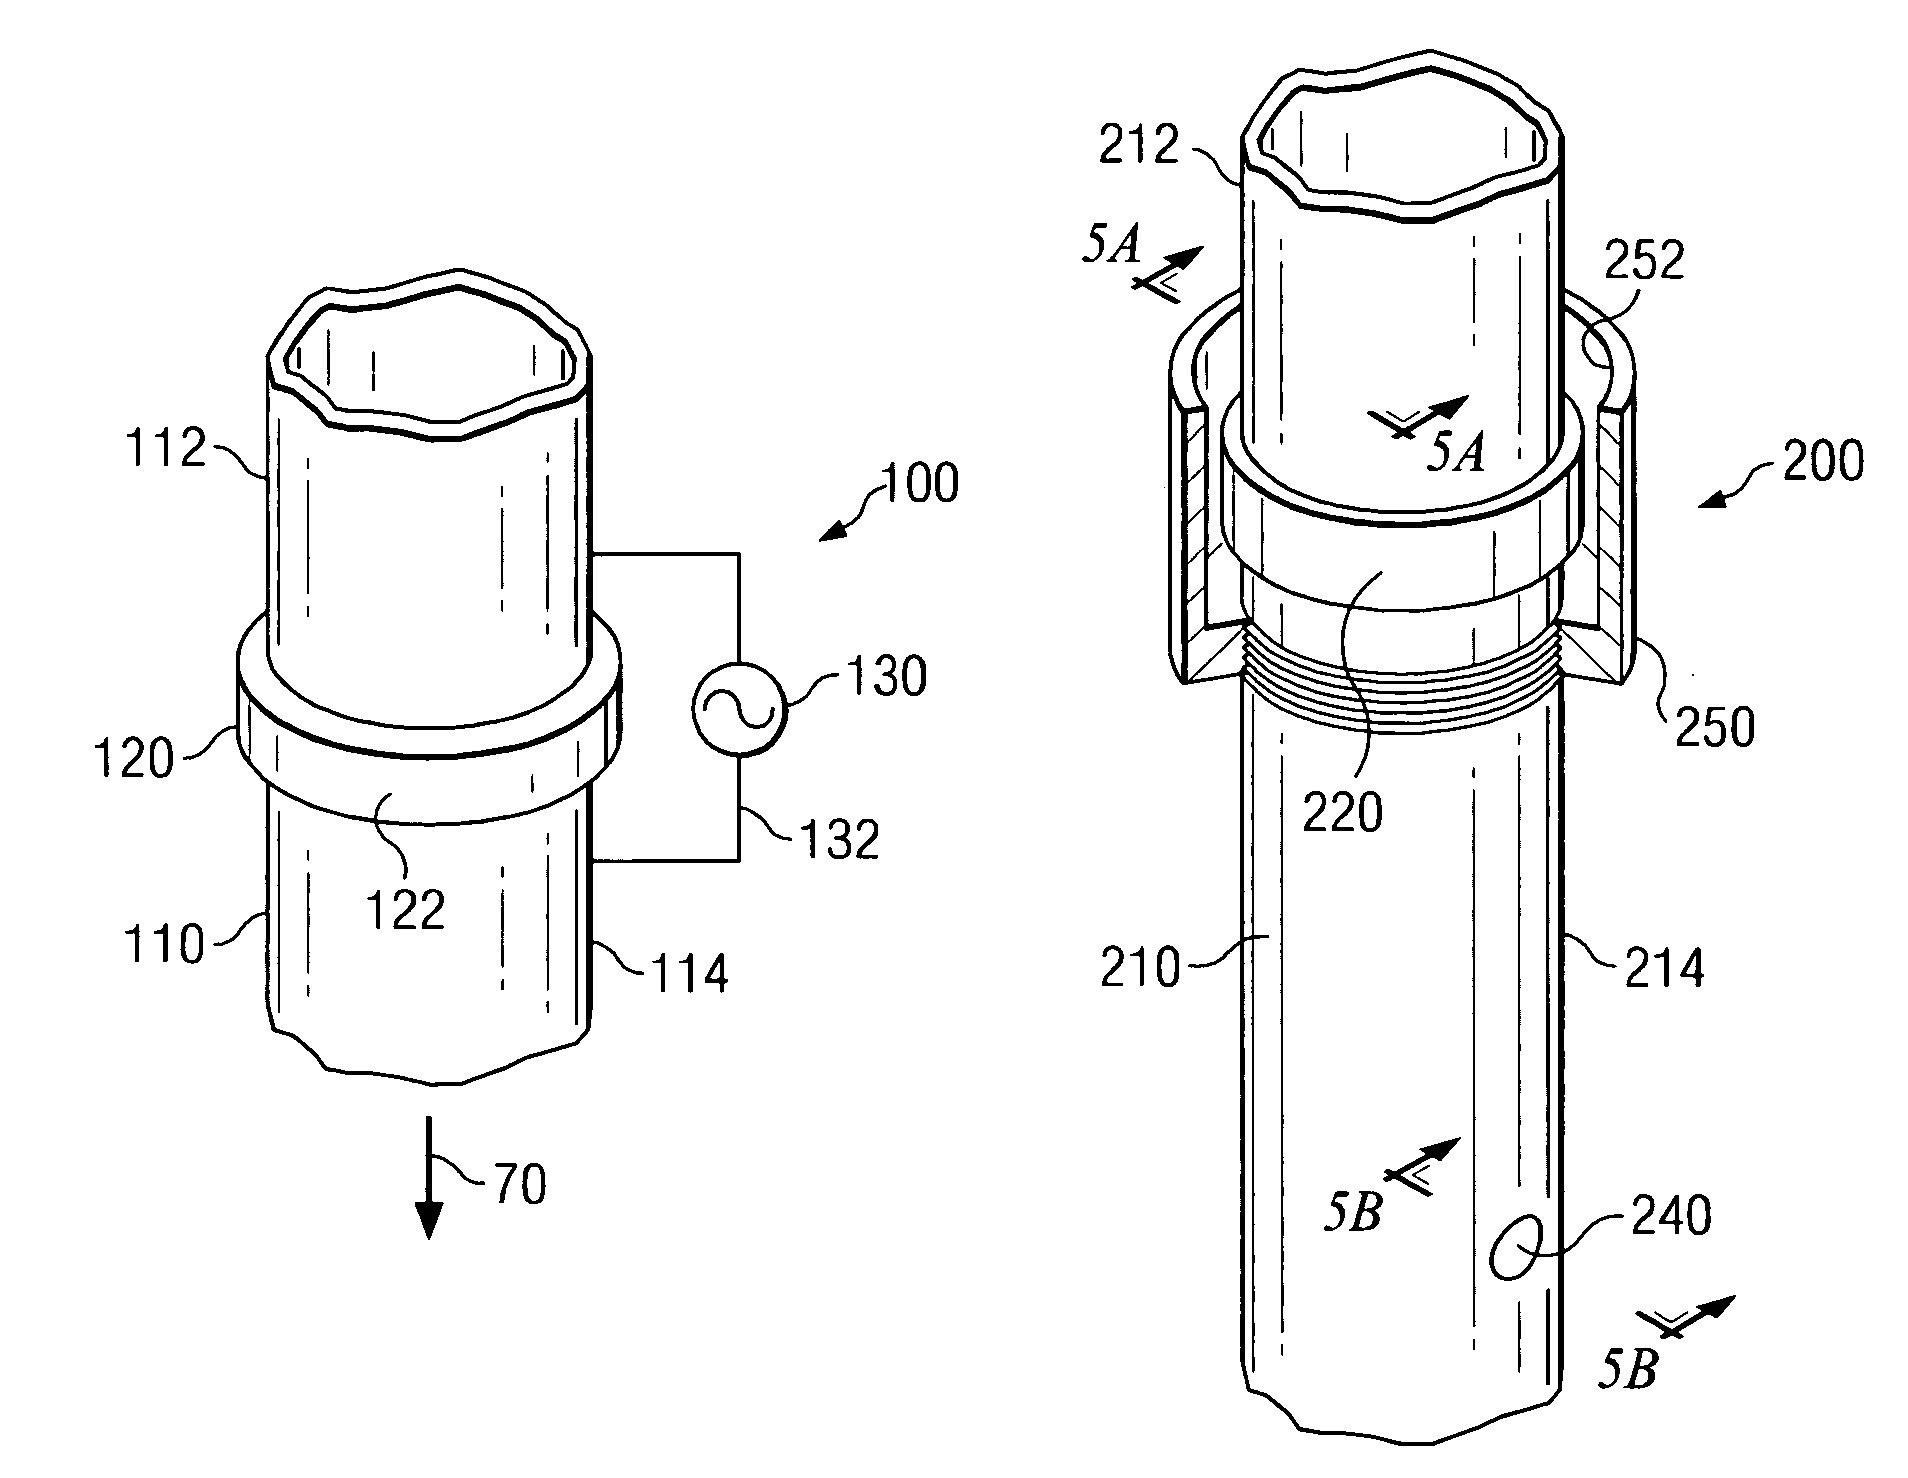 Well logging apparatus for obtaining azimuthally sensitive formation resistivity measurements